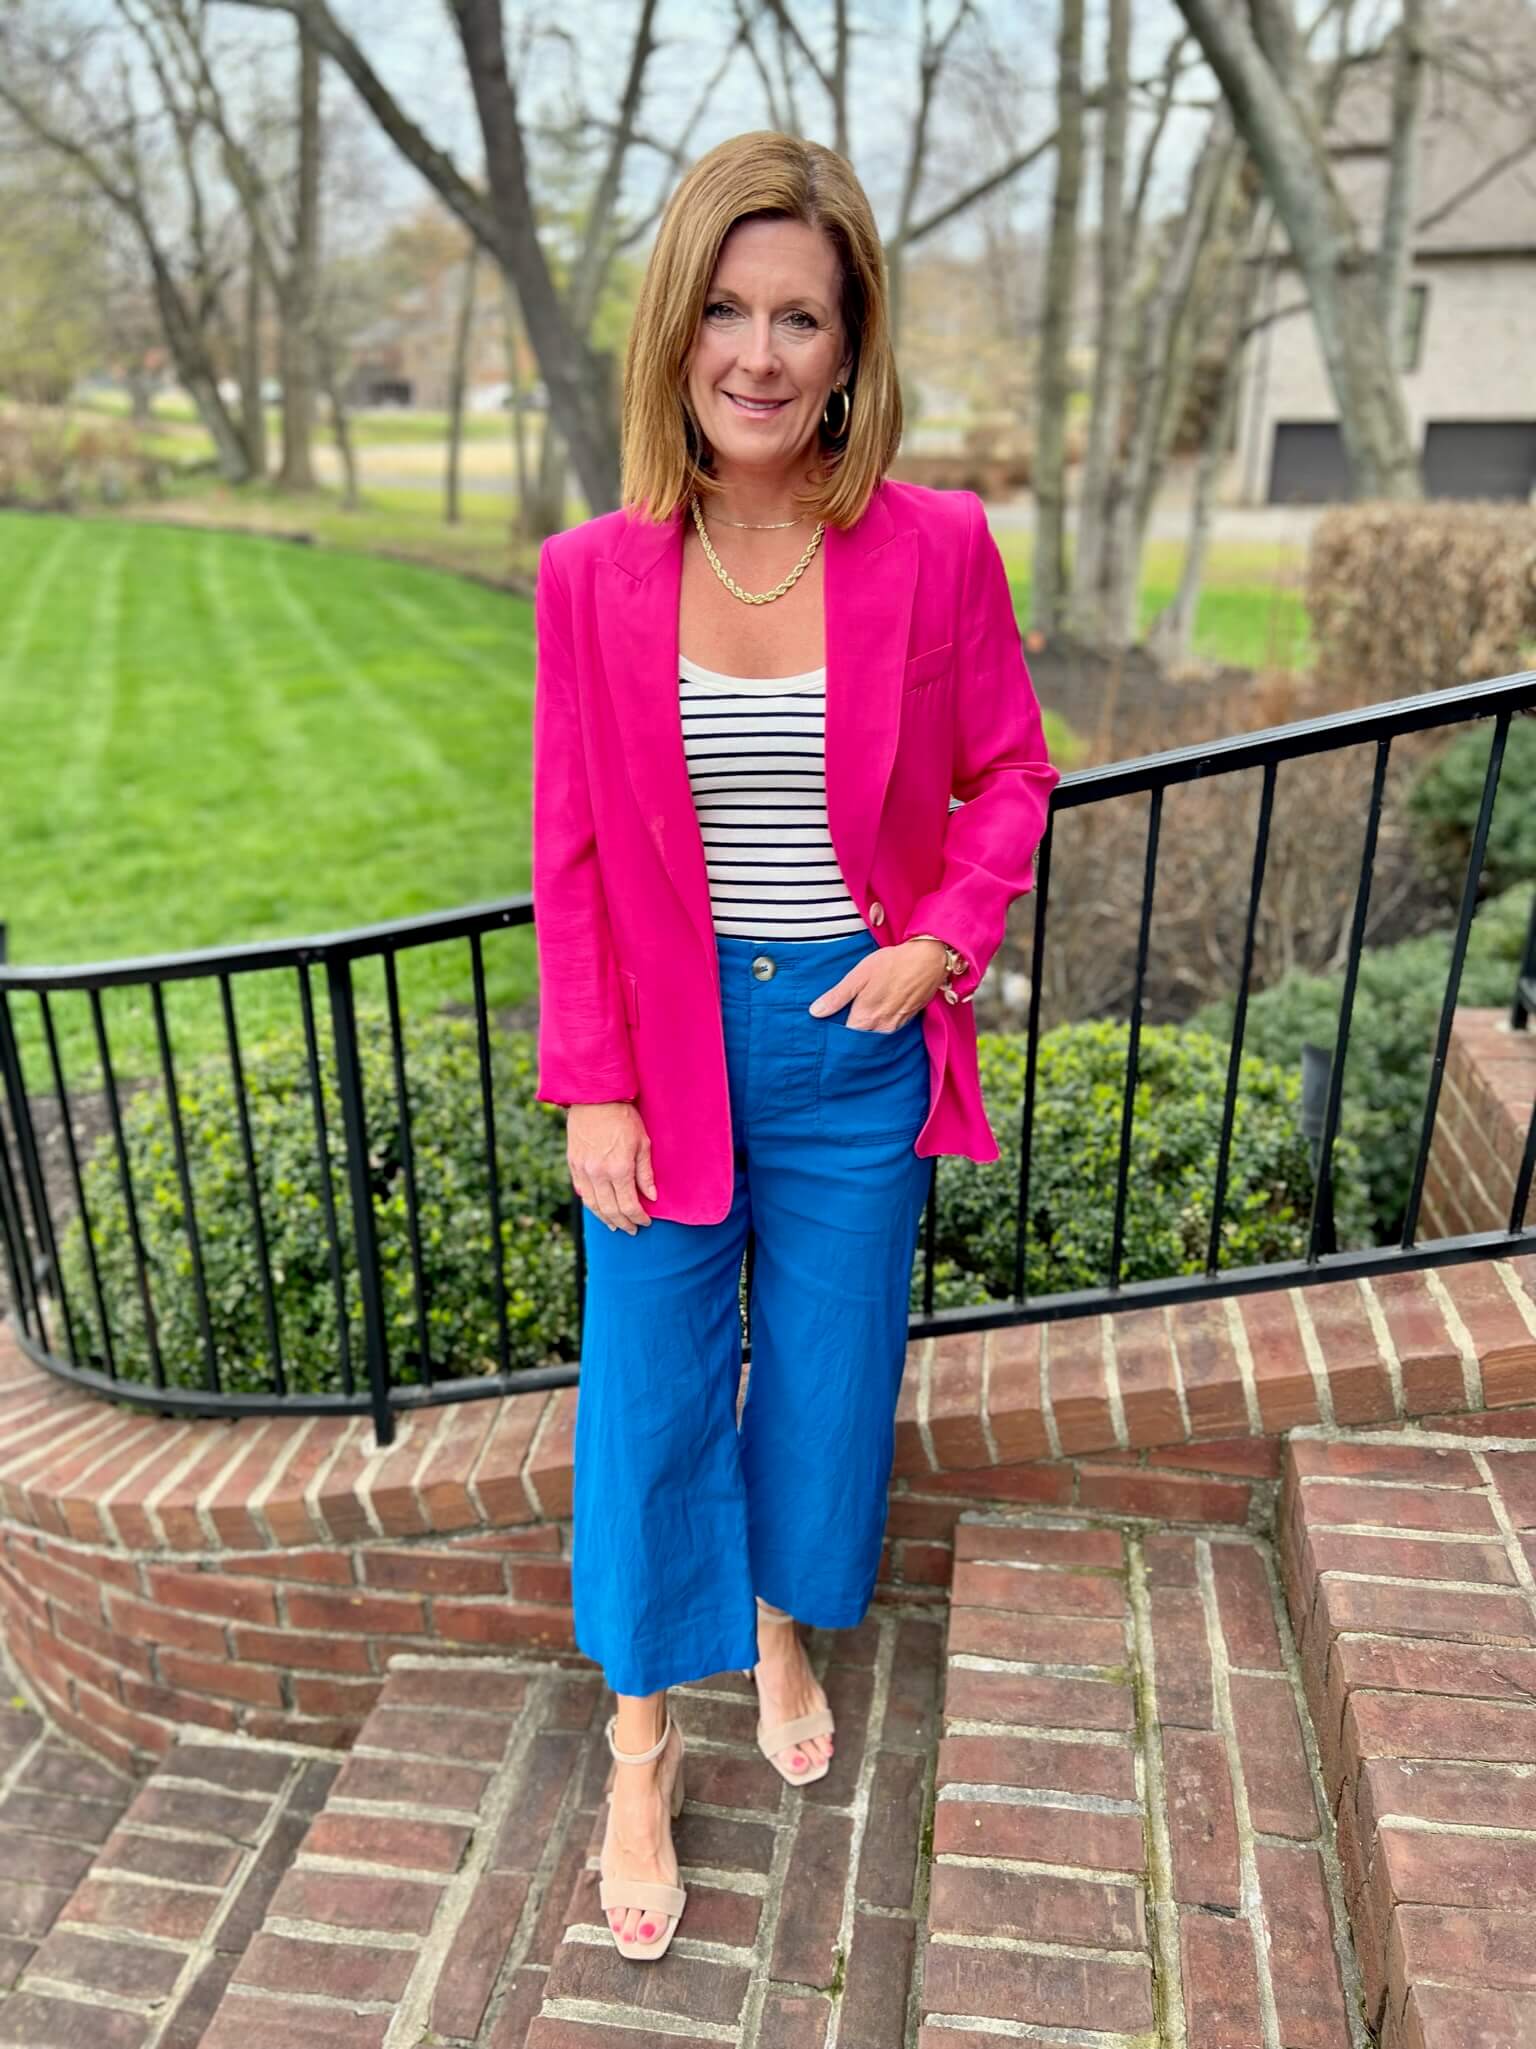 How To Create Fun Colorblocked Looks For Spring Pink Blazer & Blue Wide Leg Pants how to wear hot pink and royal blue together how to colorblock pink and blue how to wear a blazer with wide leg pants how to wear bright colors this spring personal stylists share colorblocking inspiration Nashville stylists give colorblocking tips